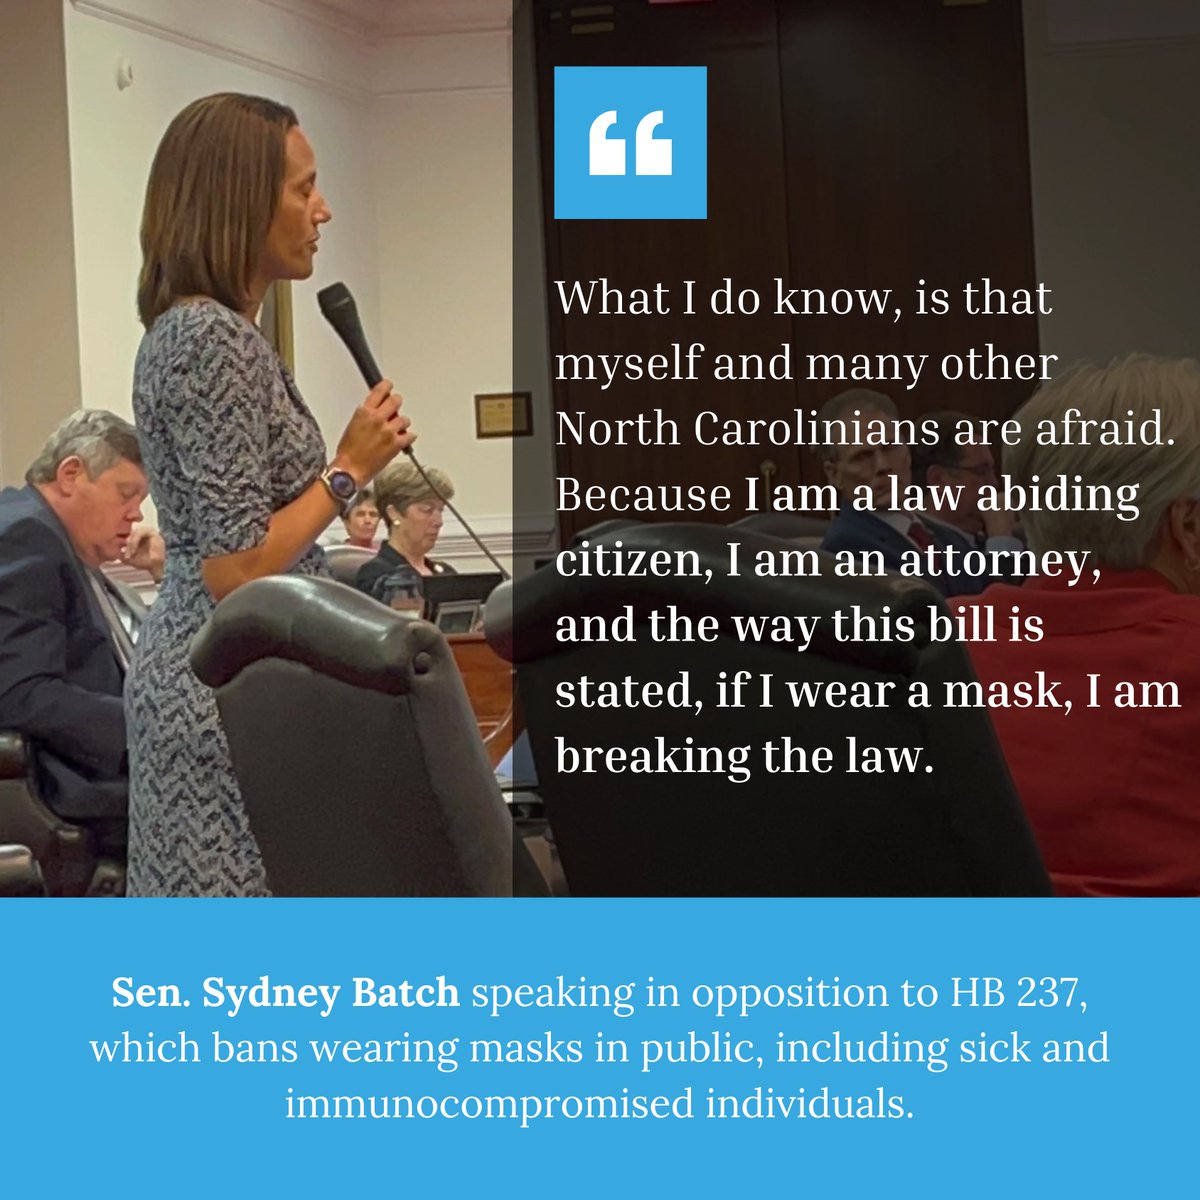 I stand firm in opposition to HB 237, which bans wearing masks in public for sick and immunocompromised individuals. As a law-abiding citizen and an attorney, the way this bill is written means that if I wear a mask in public, I am breaking the law. #NCpol